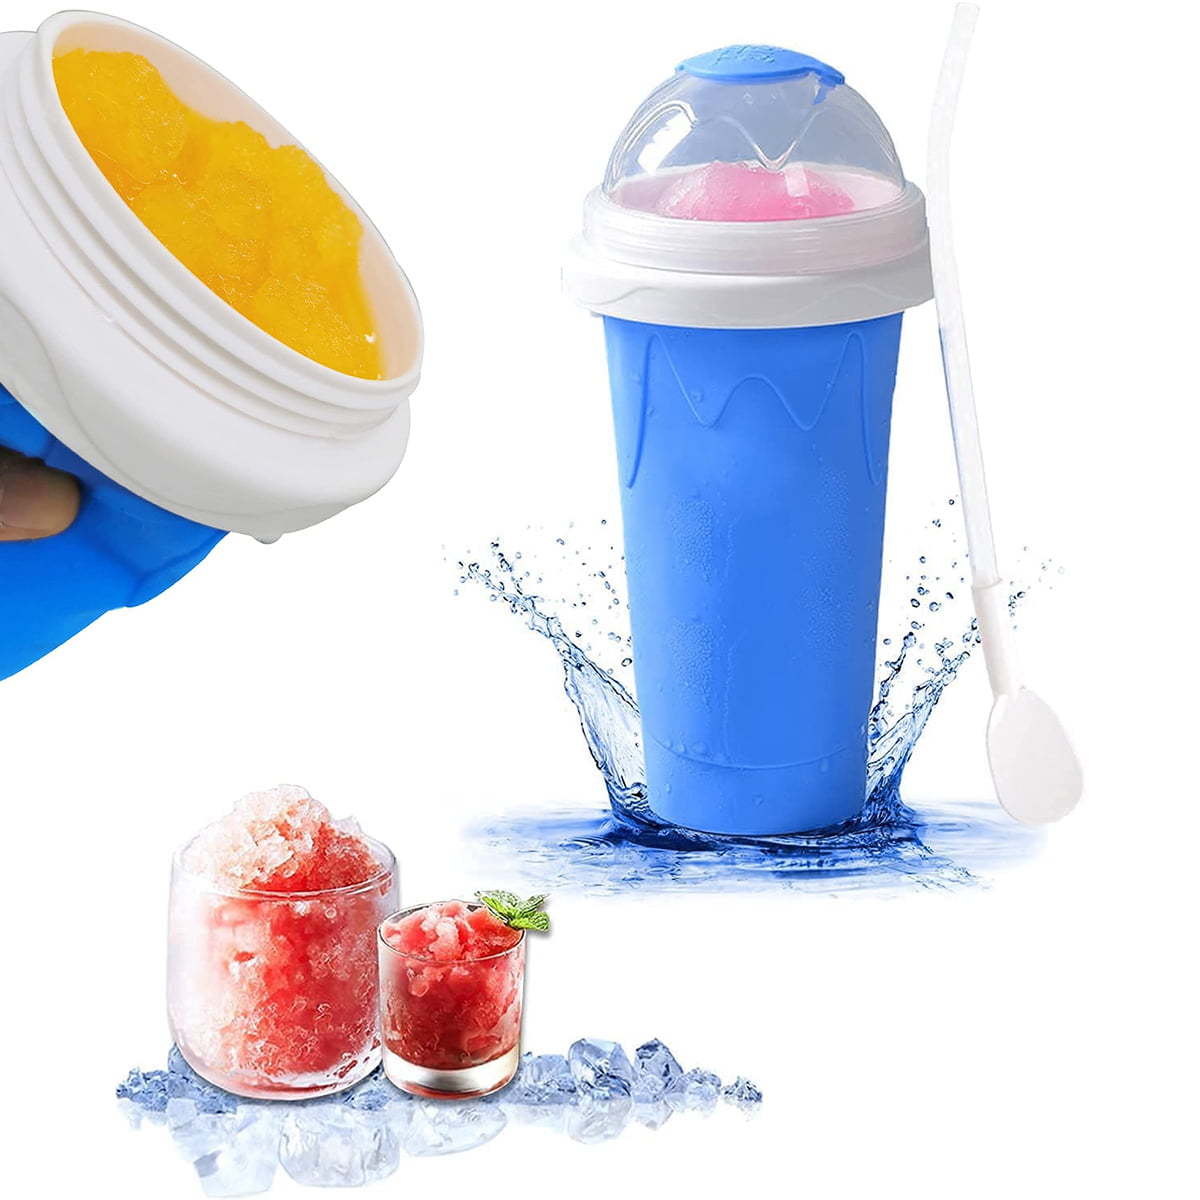 Smoothie Maker Squeeze Cup Slushy Maker Smoothie Cup Fast Cooling DIY Squeeze Cup Slush Machine Homemade Milkshake Ice Cream Machine Cup Double Layer Summer Juice Ice Cream Cup for Children Gifts 